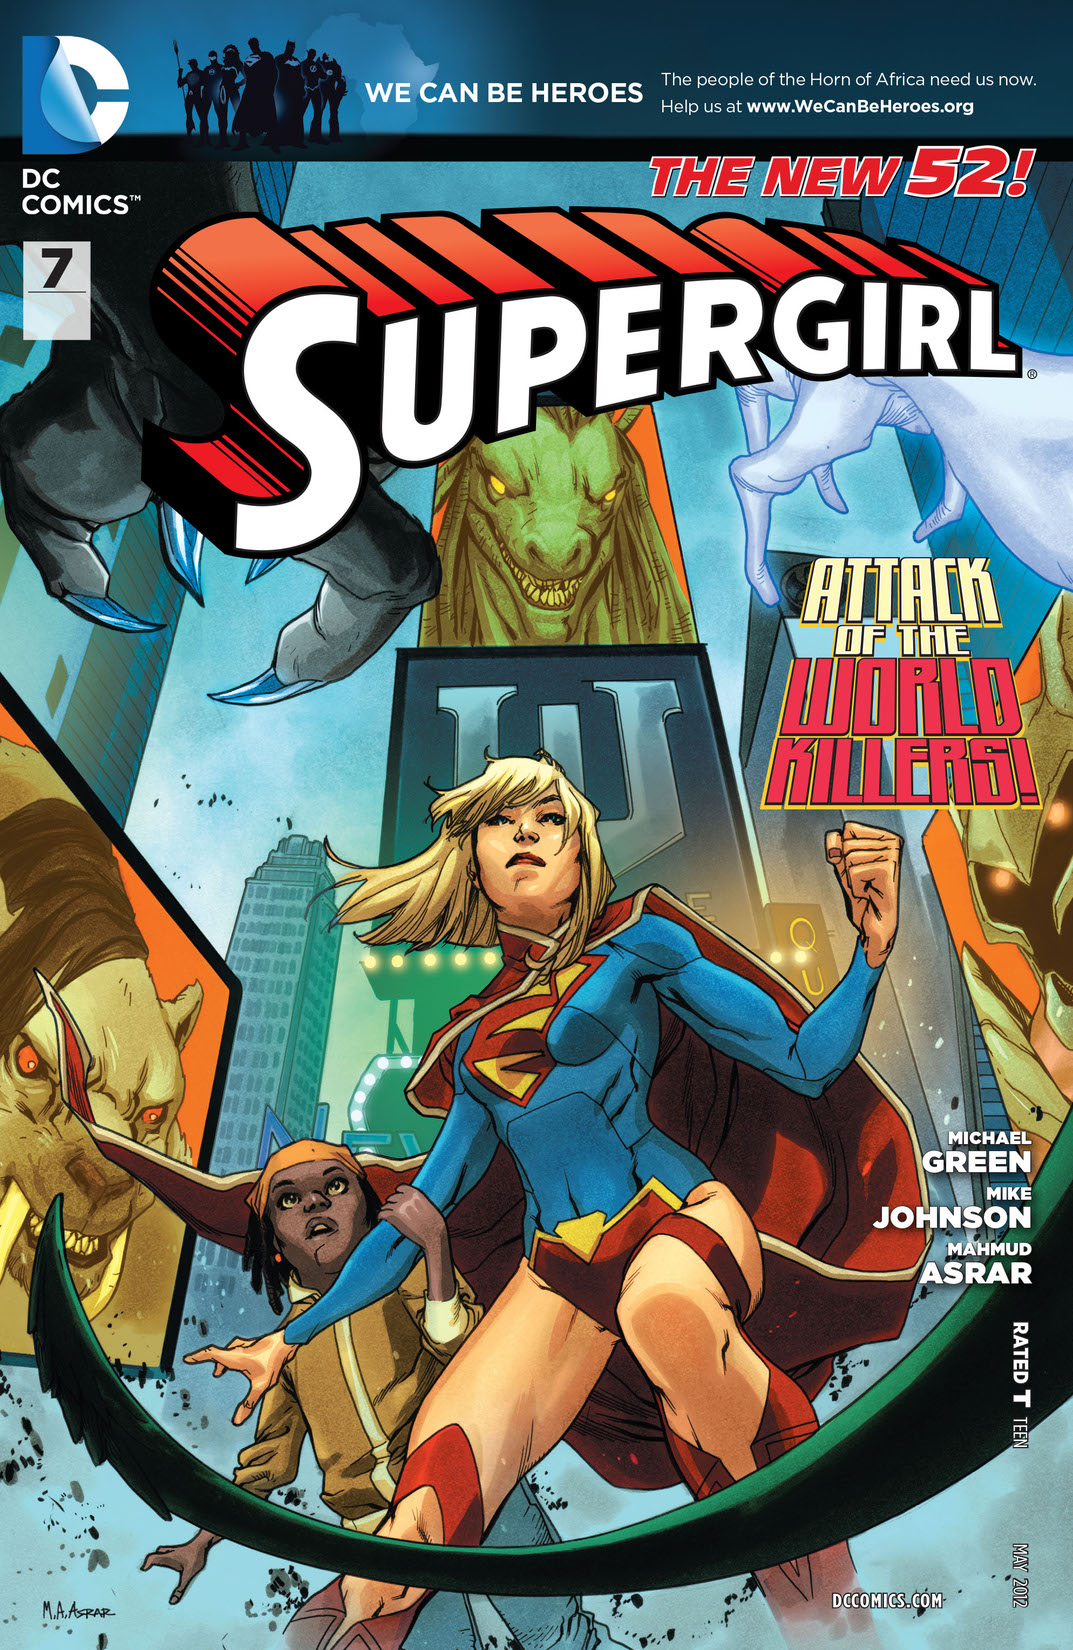 Supergirl (2011-) #7 preview images